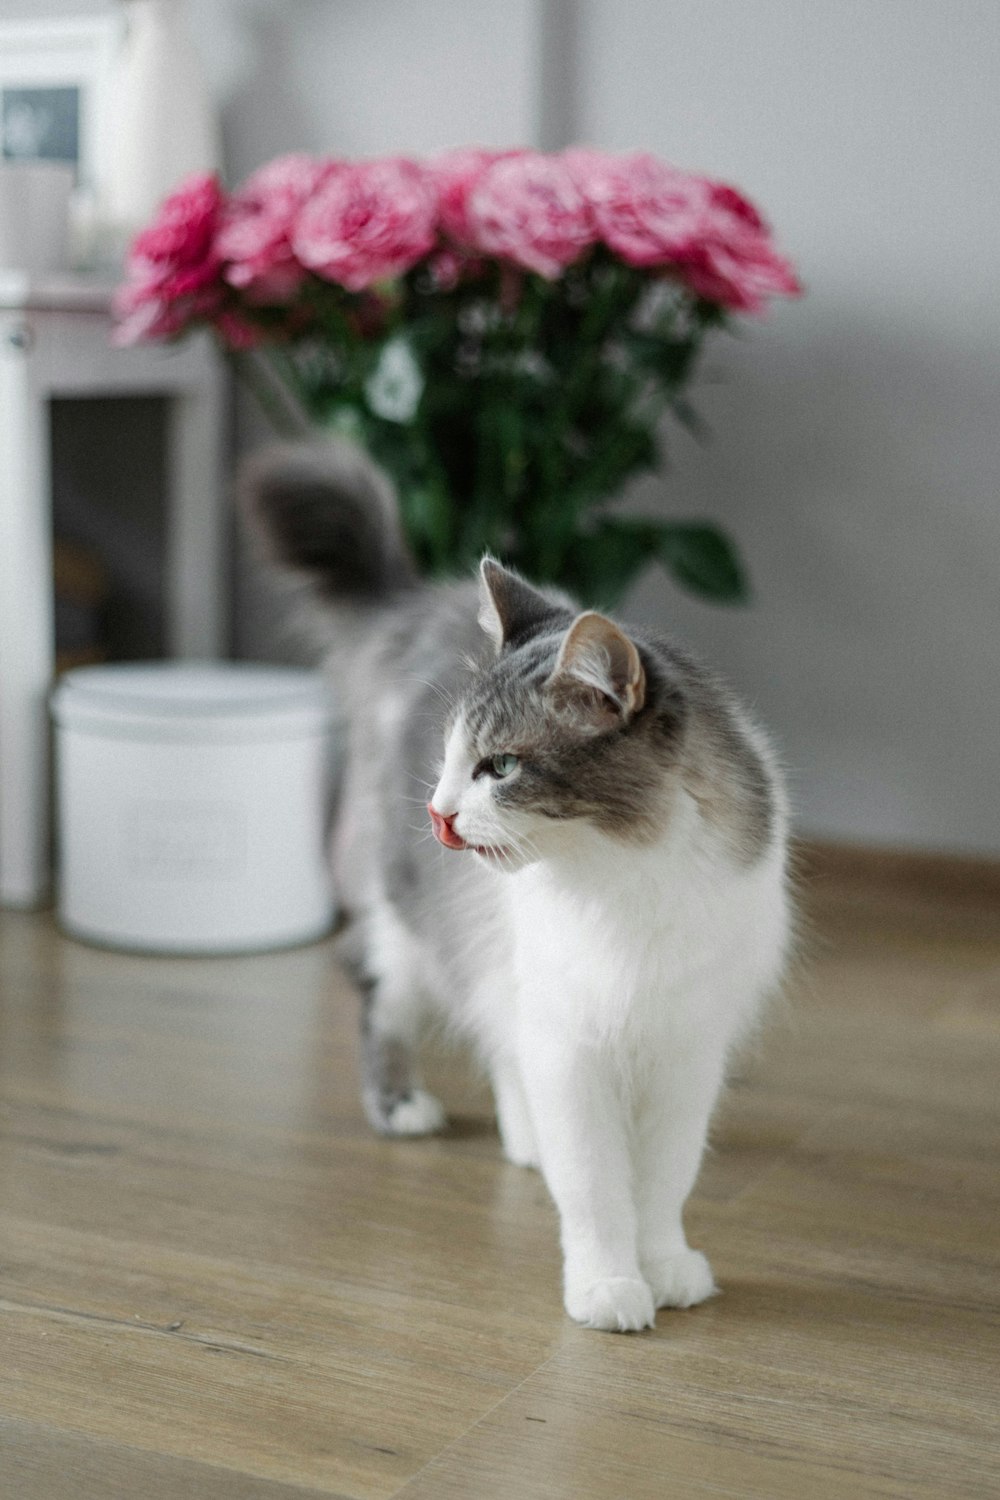 a gray and white cat walking across a wooden floor